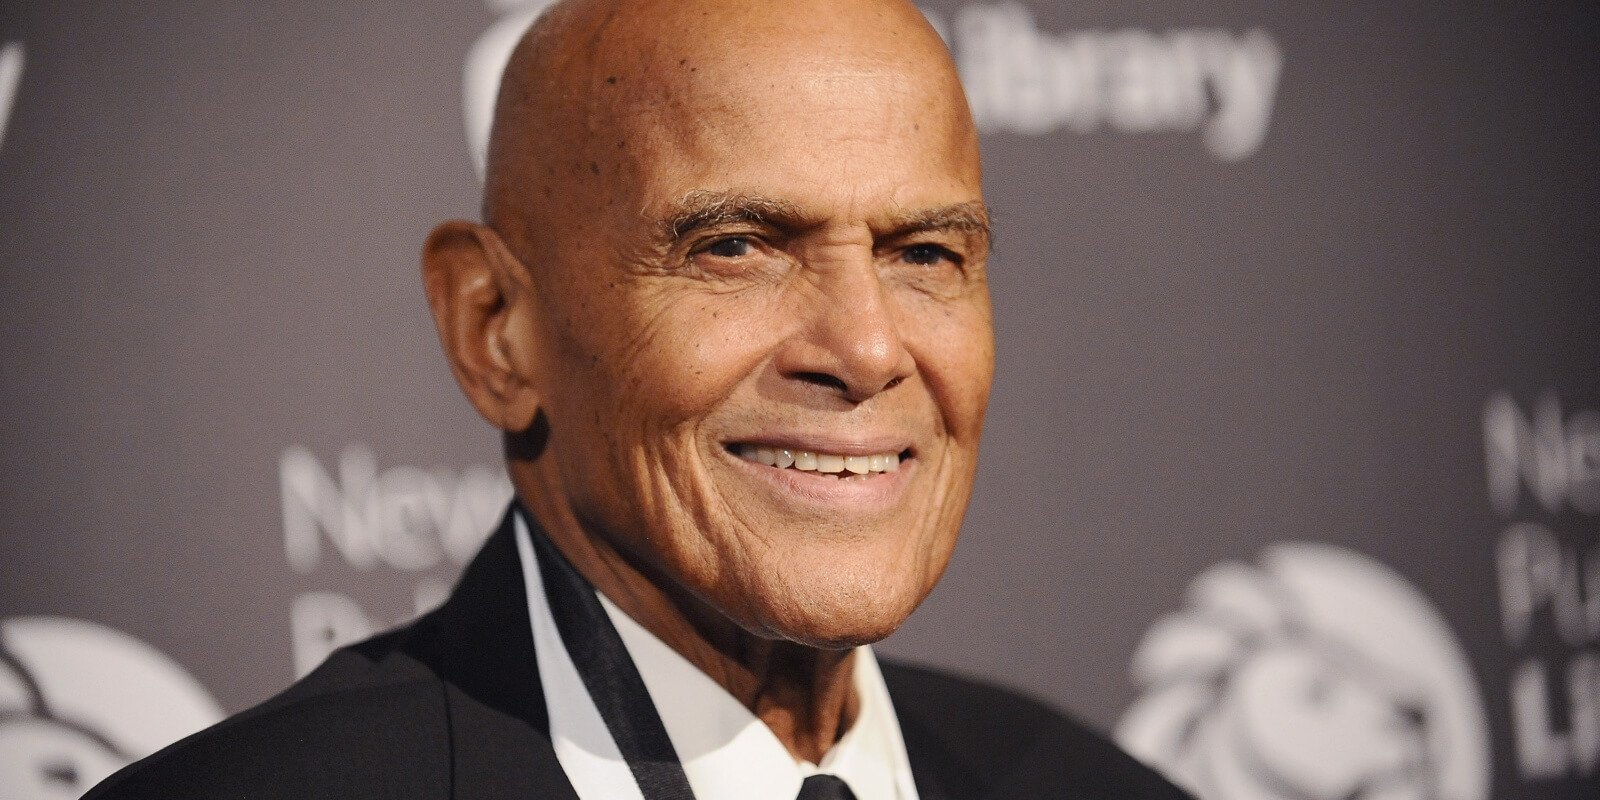 Harry Belafonte died at age 96 of congestive heart failure on Apr. 25, 2023.